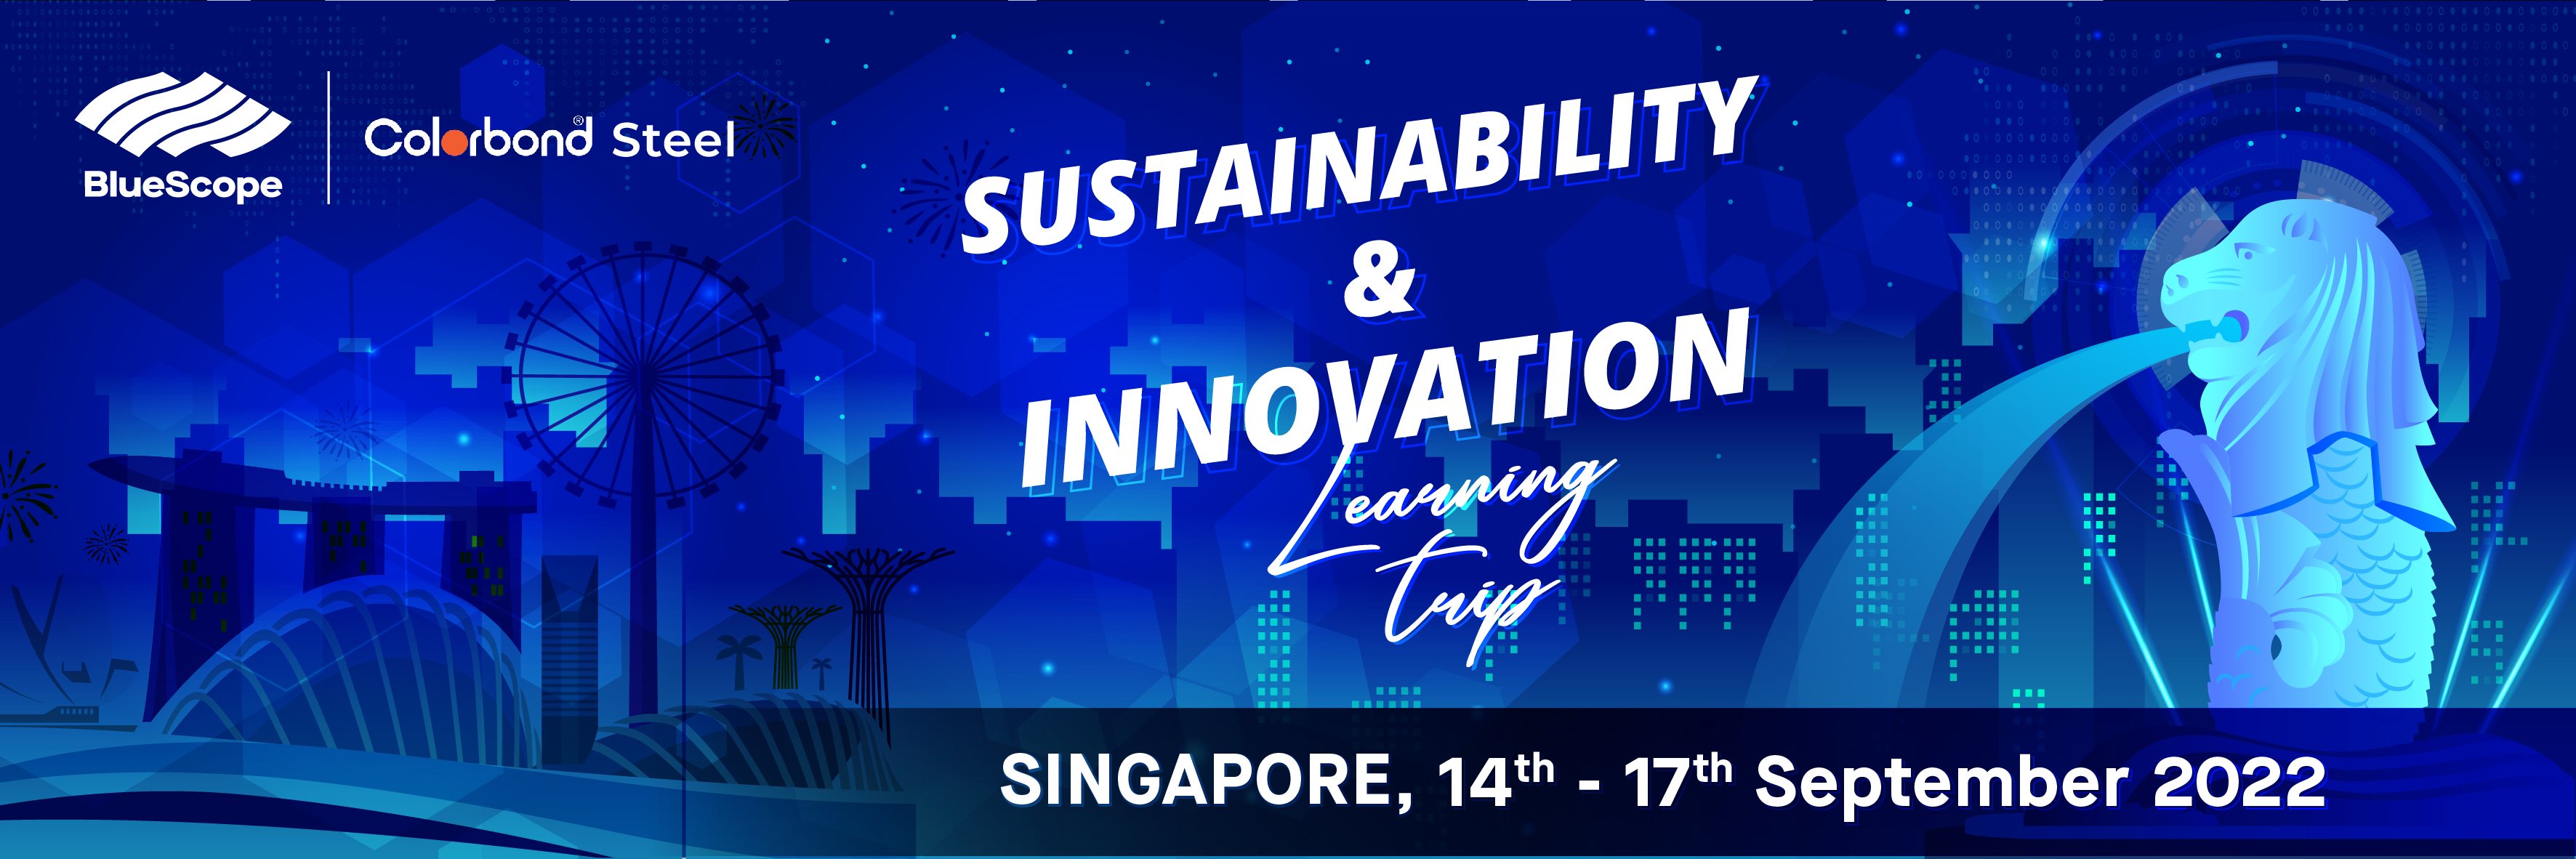 LEARNING TRIP IN SINGAPORE 2022 – “SUSTAINABILITY AND INNOVATION”